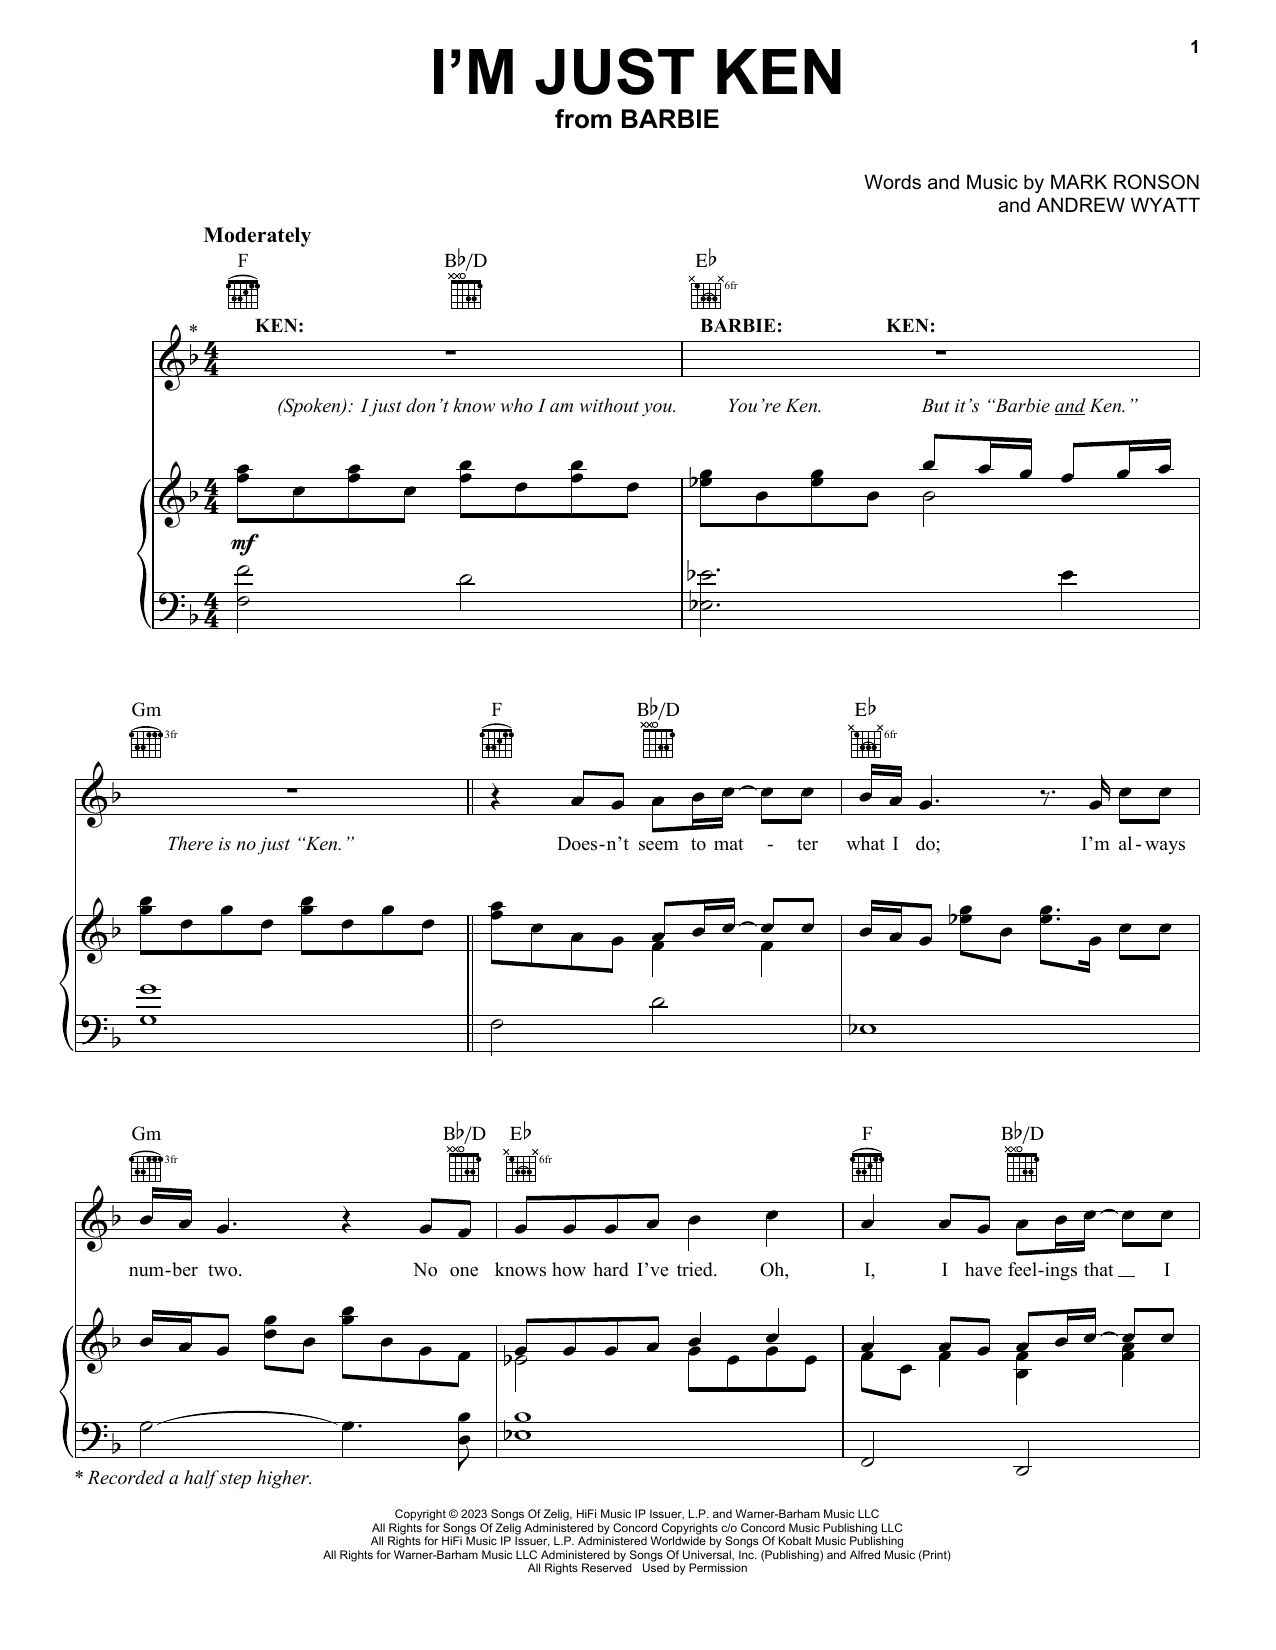 I'm Just Ken (from Barbie) Sheet Music by Ryan Gosling for Piano/Keyboard  and Voice